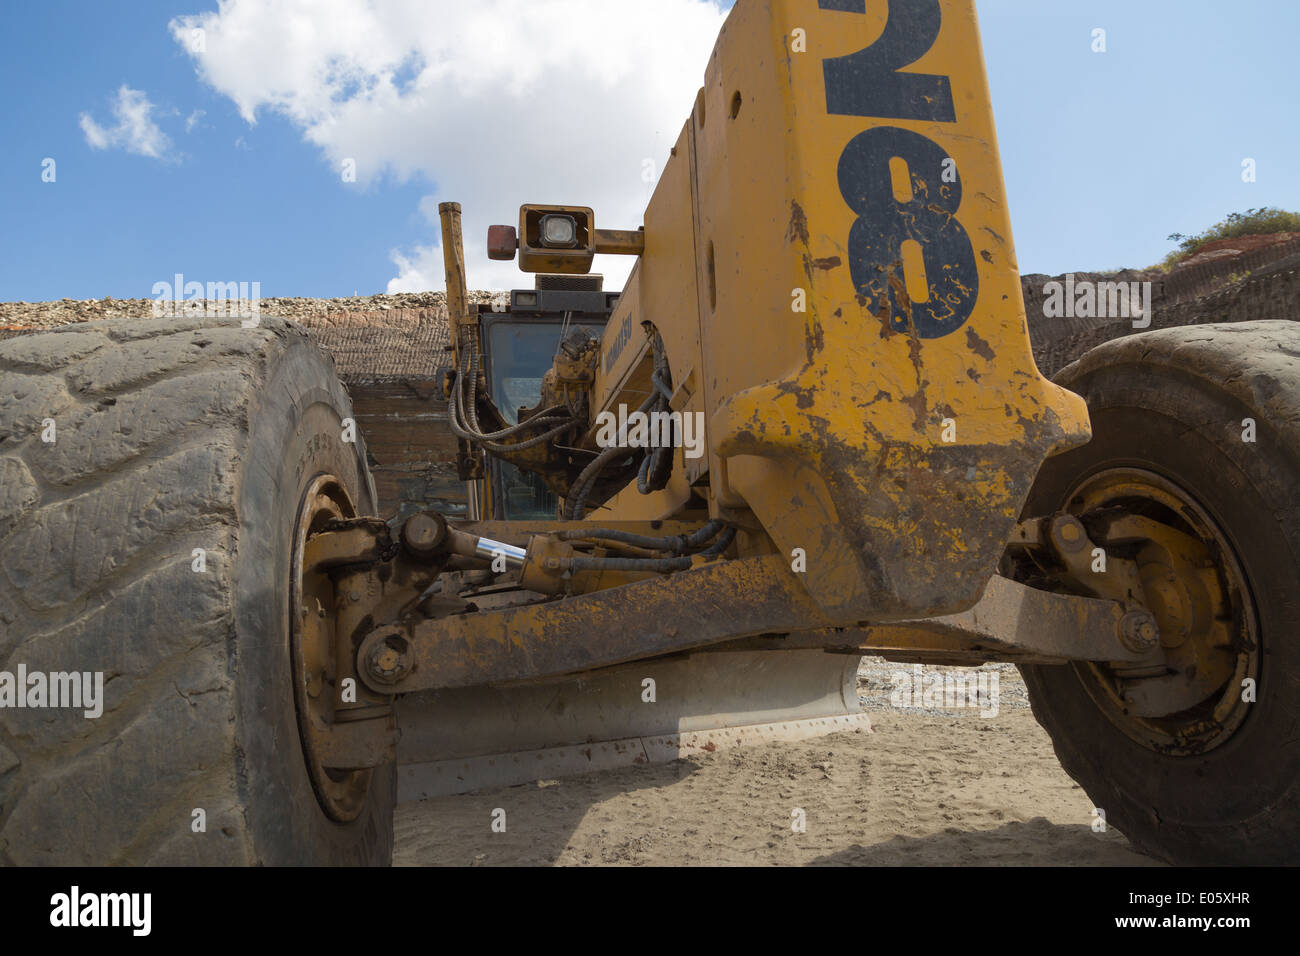 Komatsu mining machinery parked up during shift change in a large African open cast copper mine Stock Photo